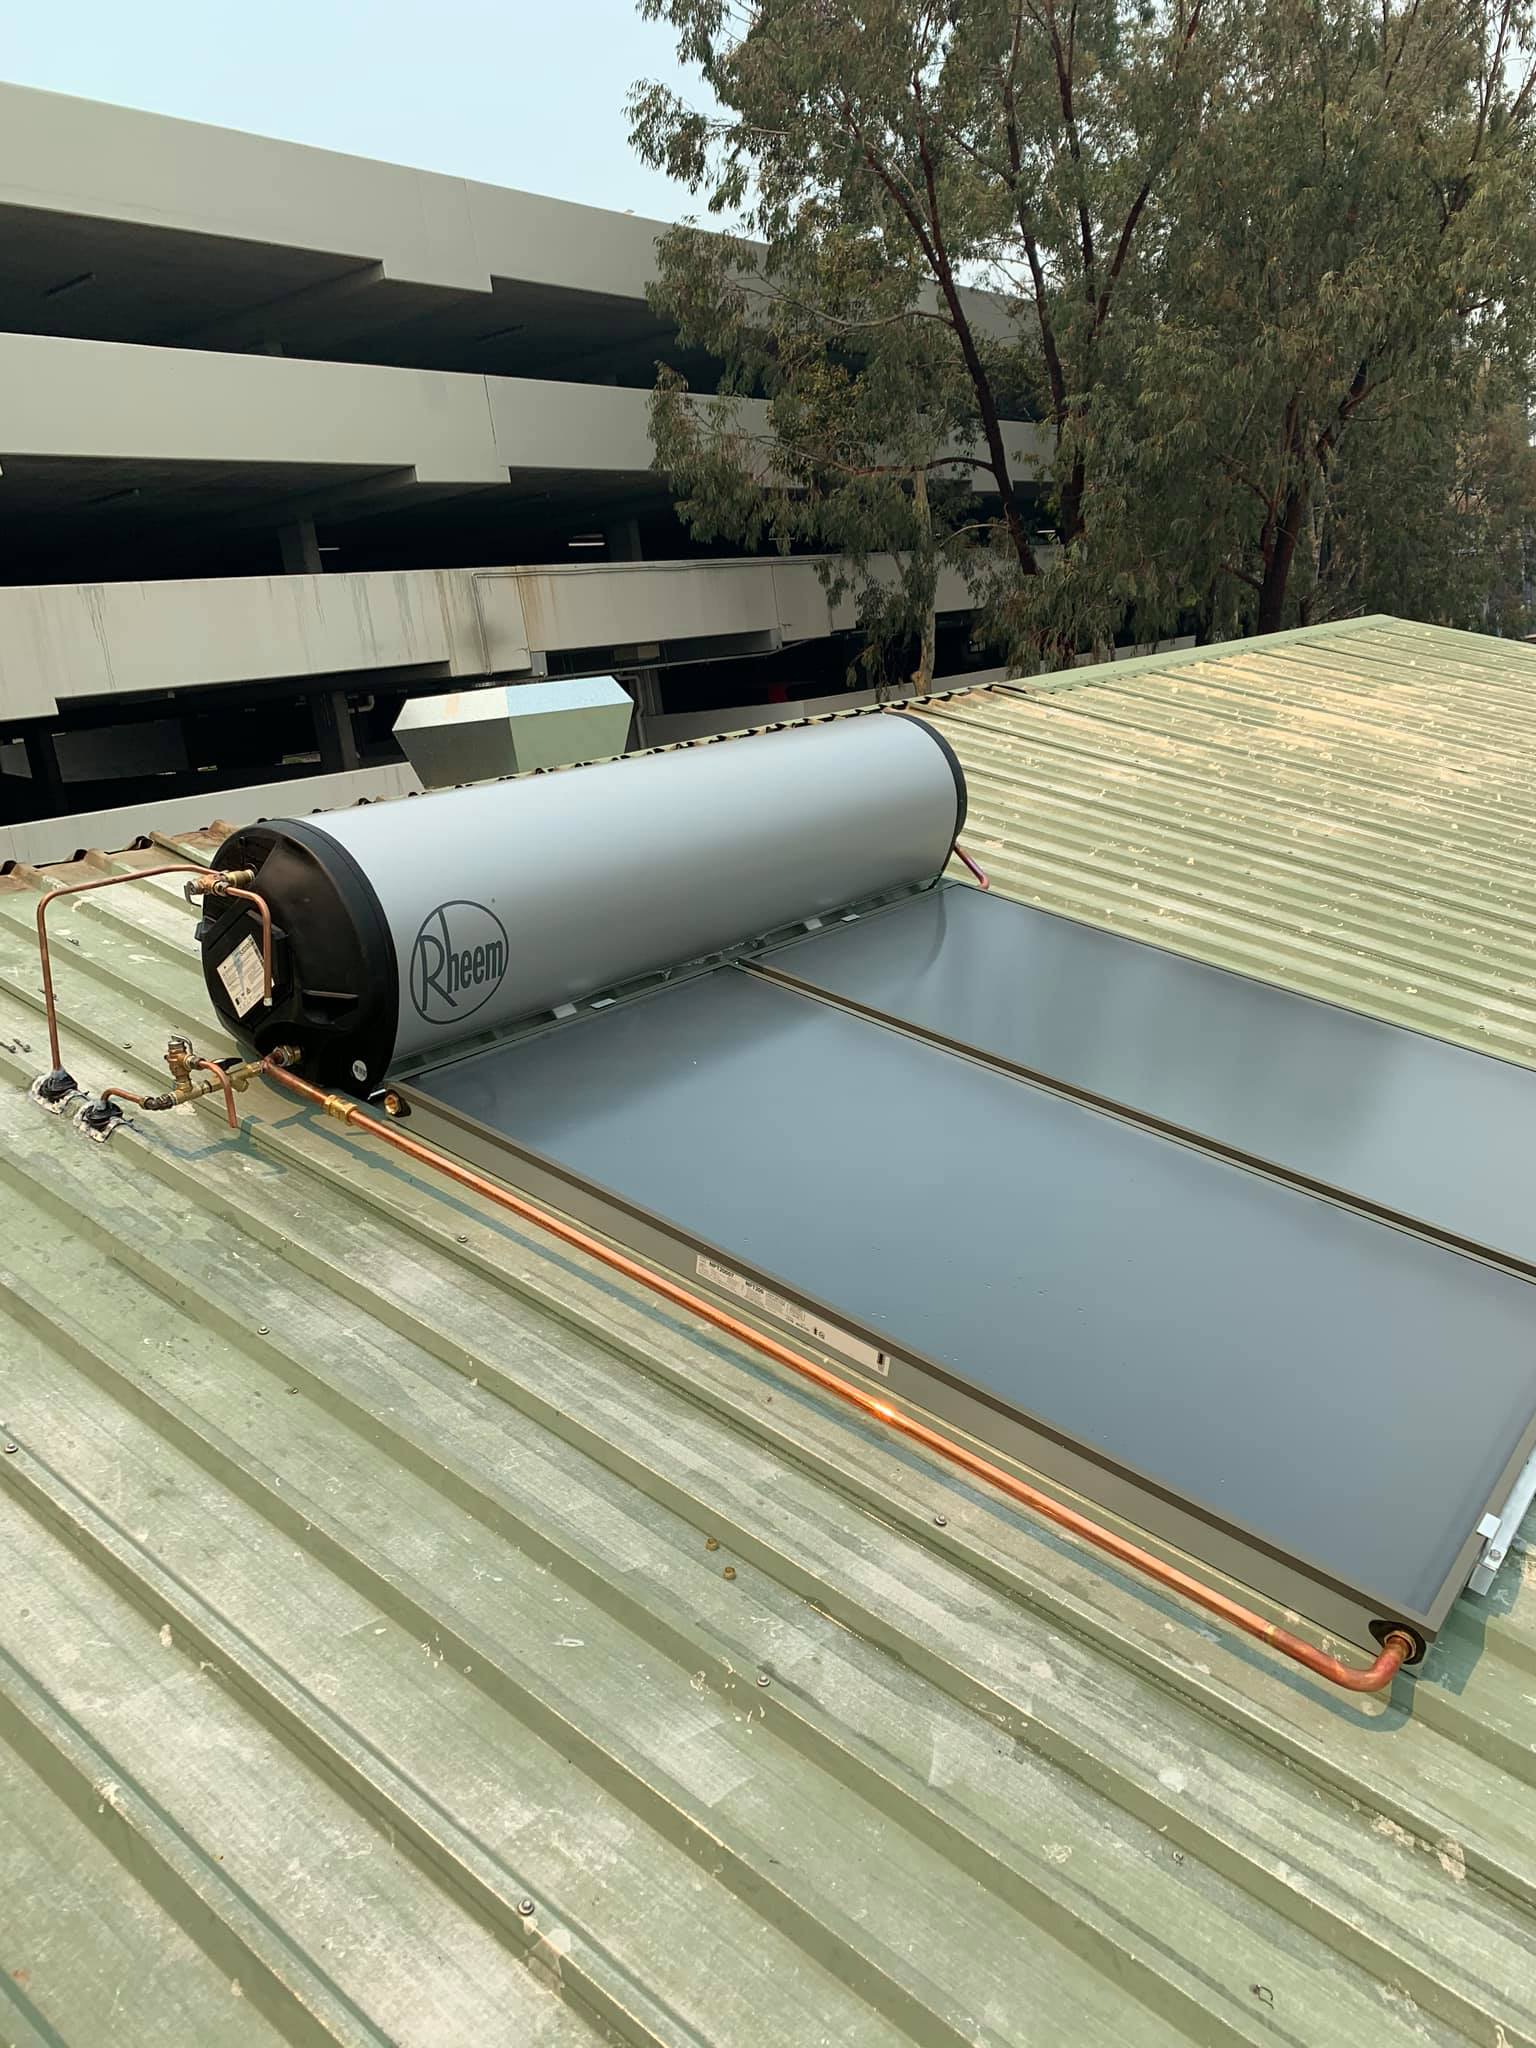 A roof displaying a Rheem solar hot water system